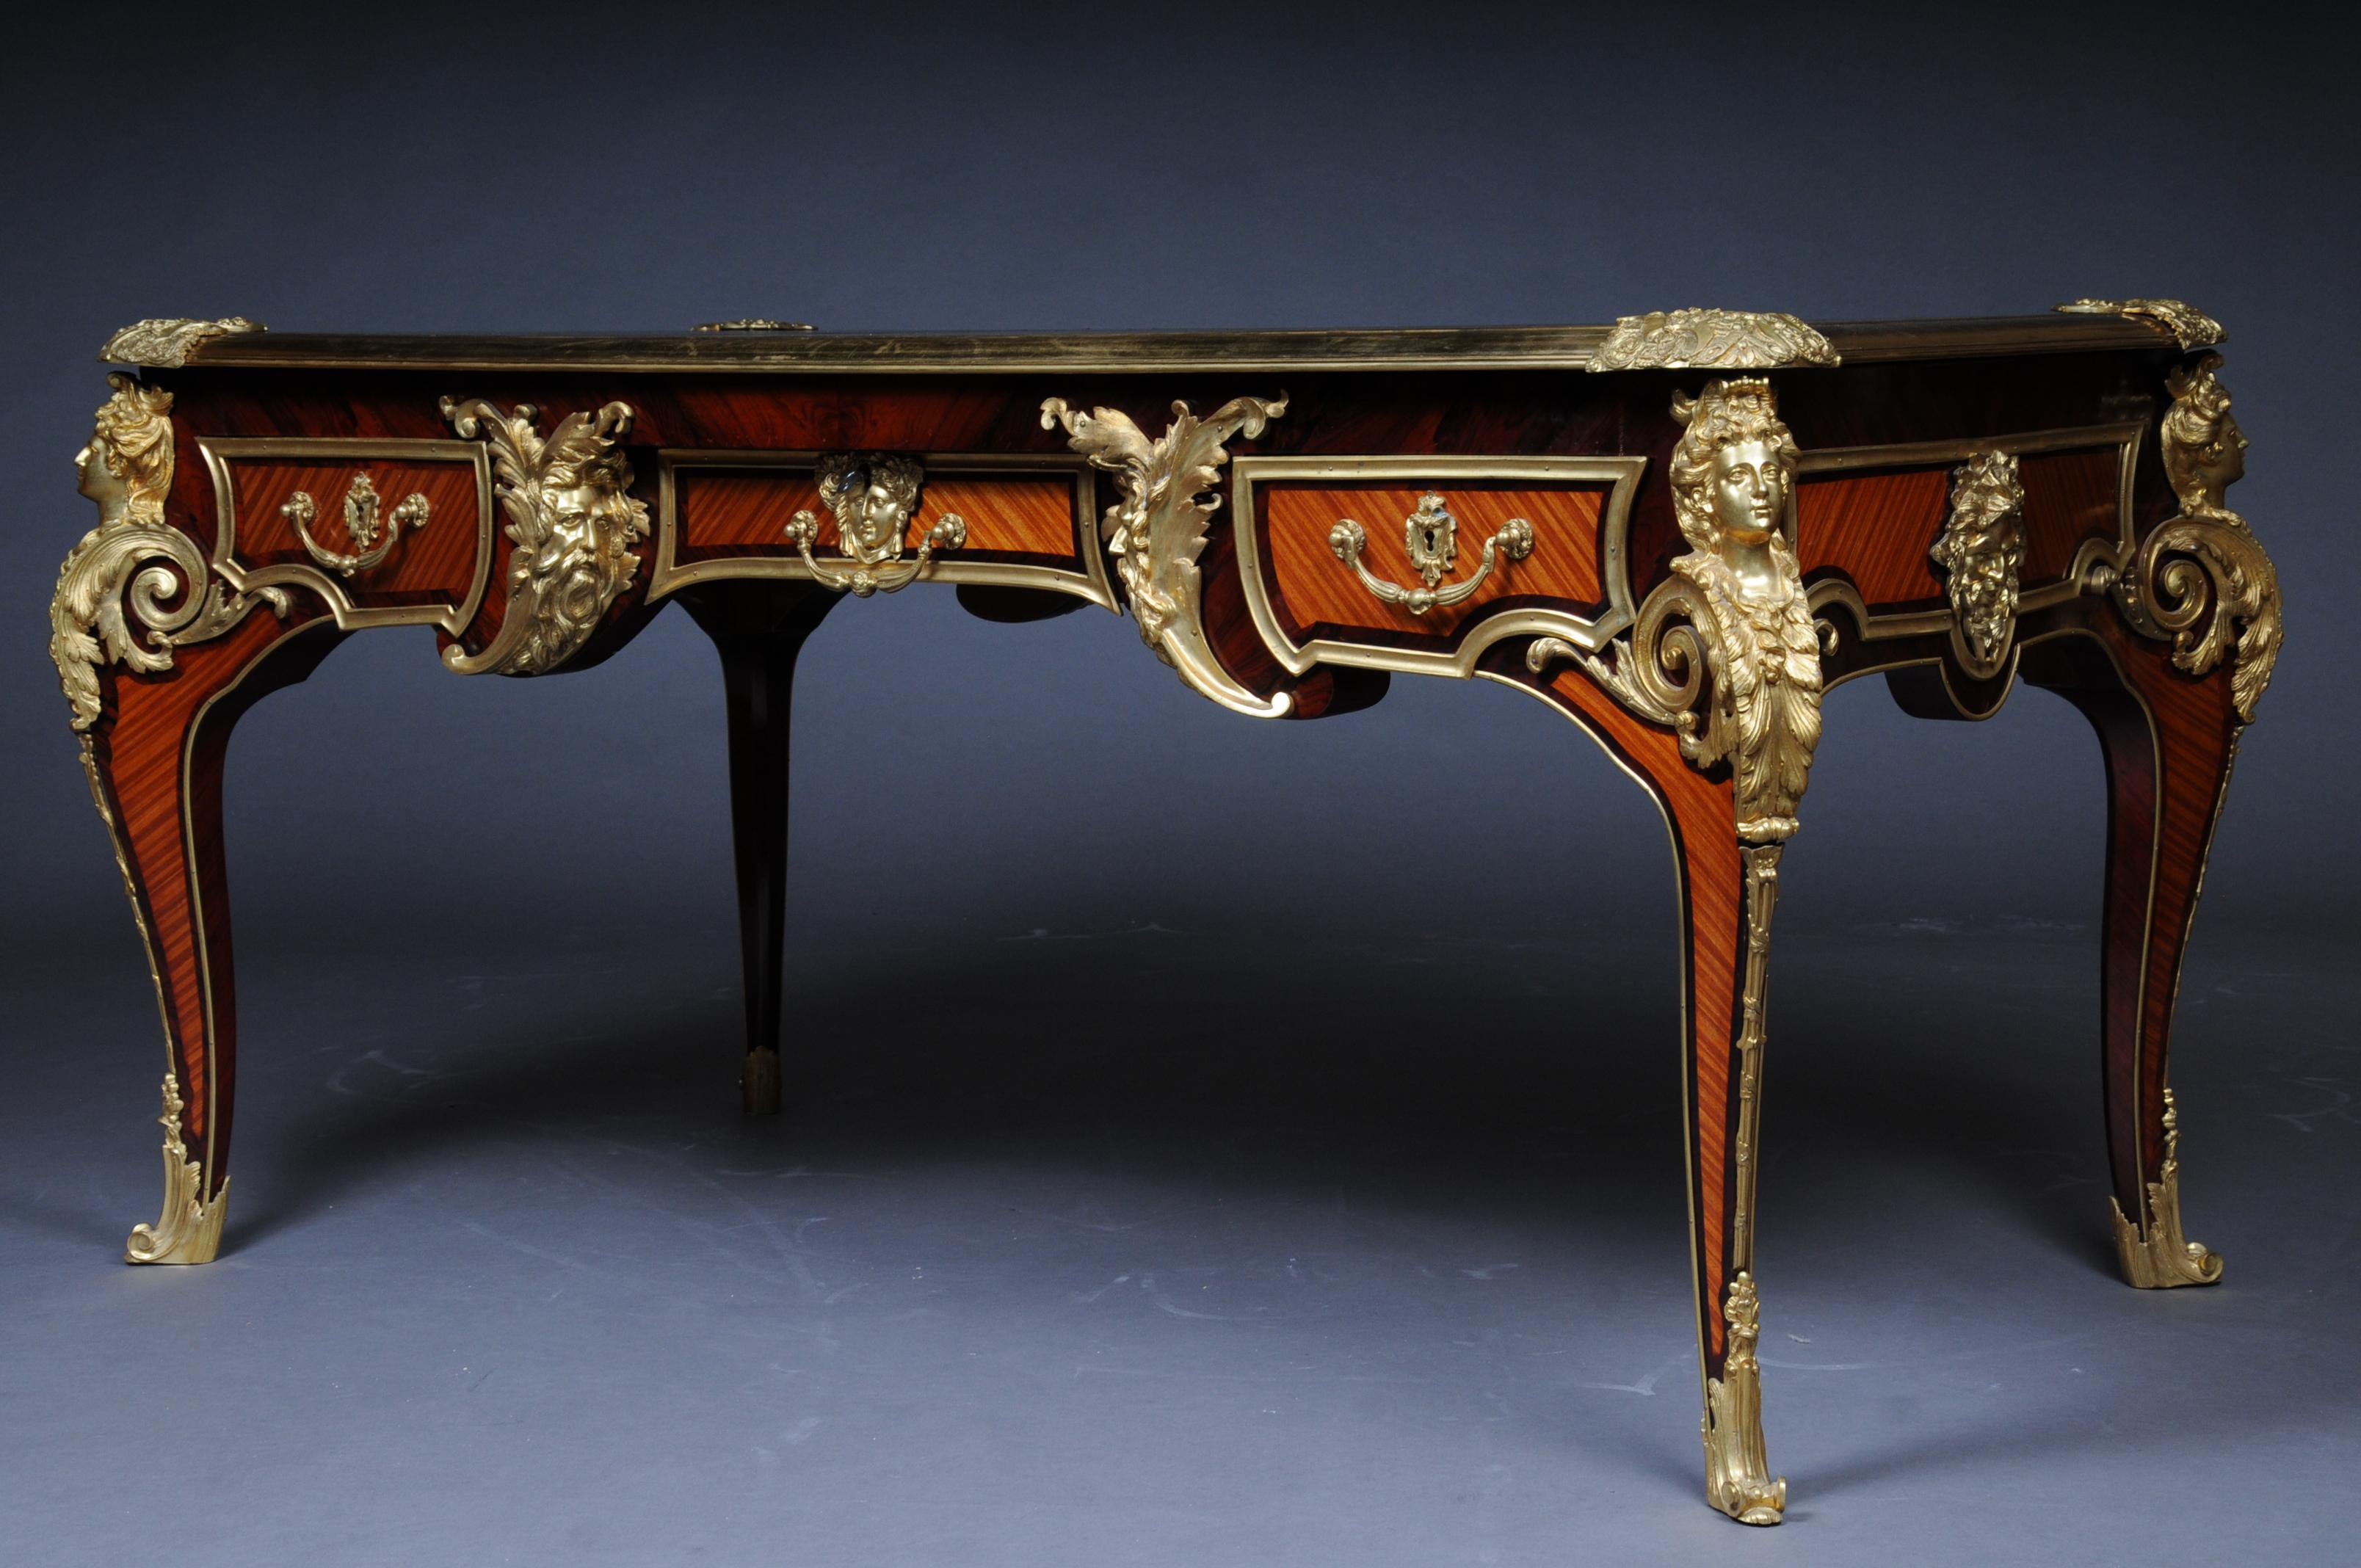 20th Century Imperial French Bureau Plat or Desk by Charles Boulle For Sale 3